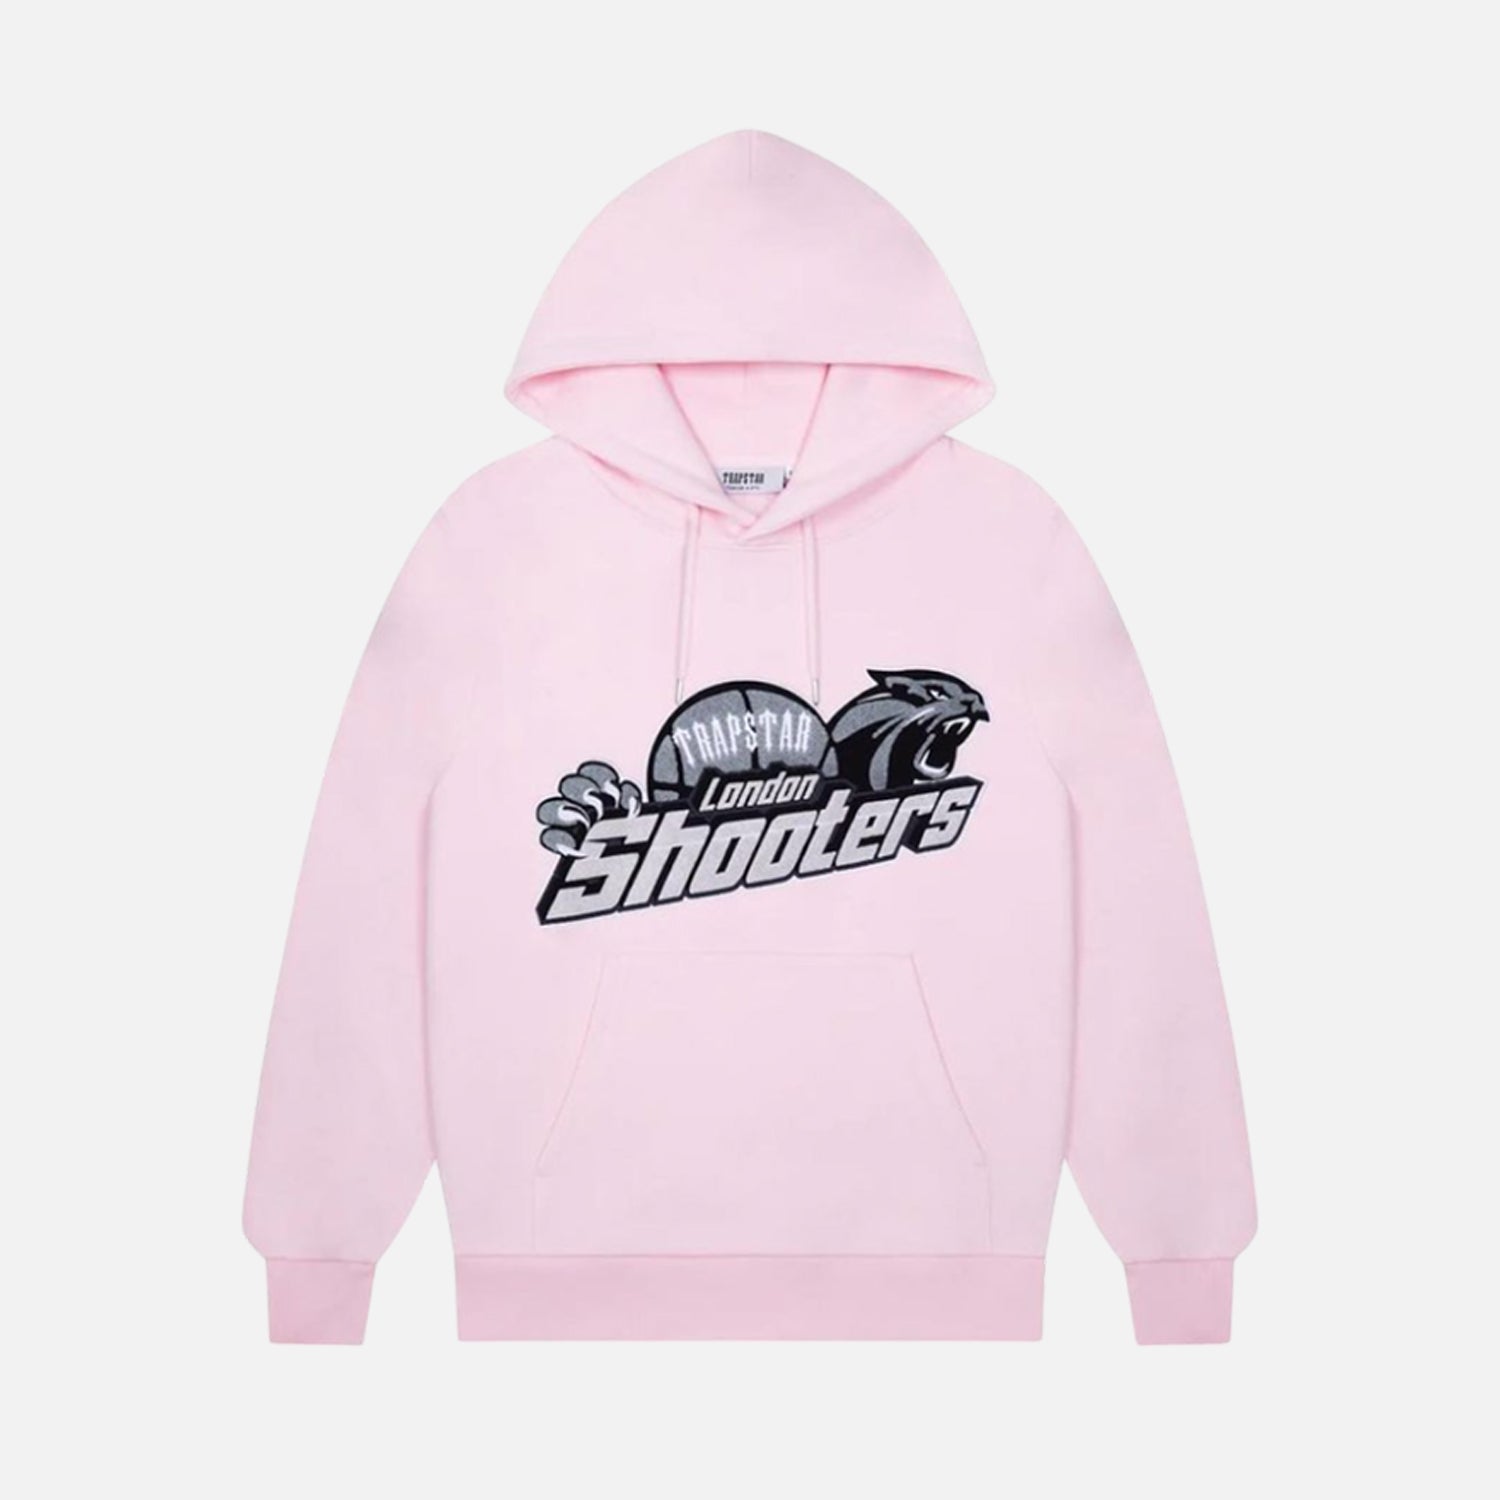 Trapstar Chenille Shooters Hoodie - Pink